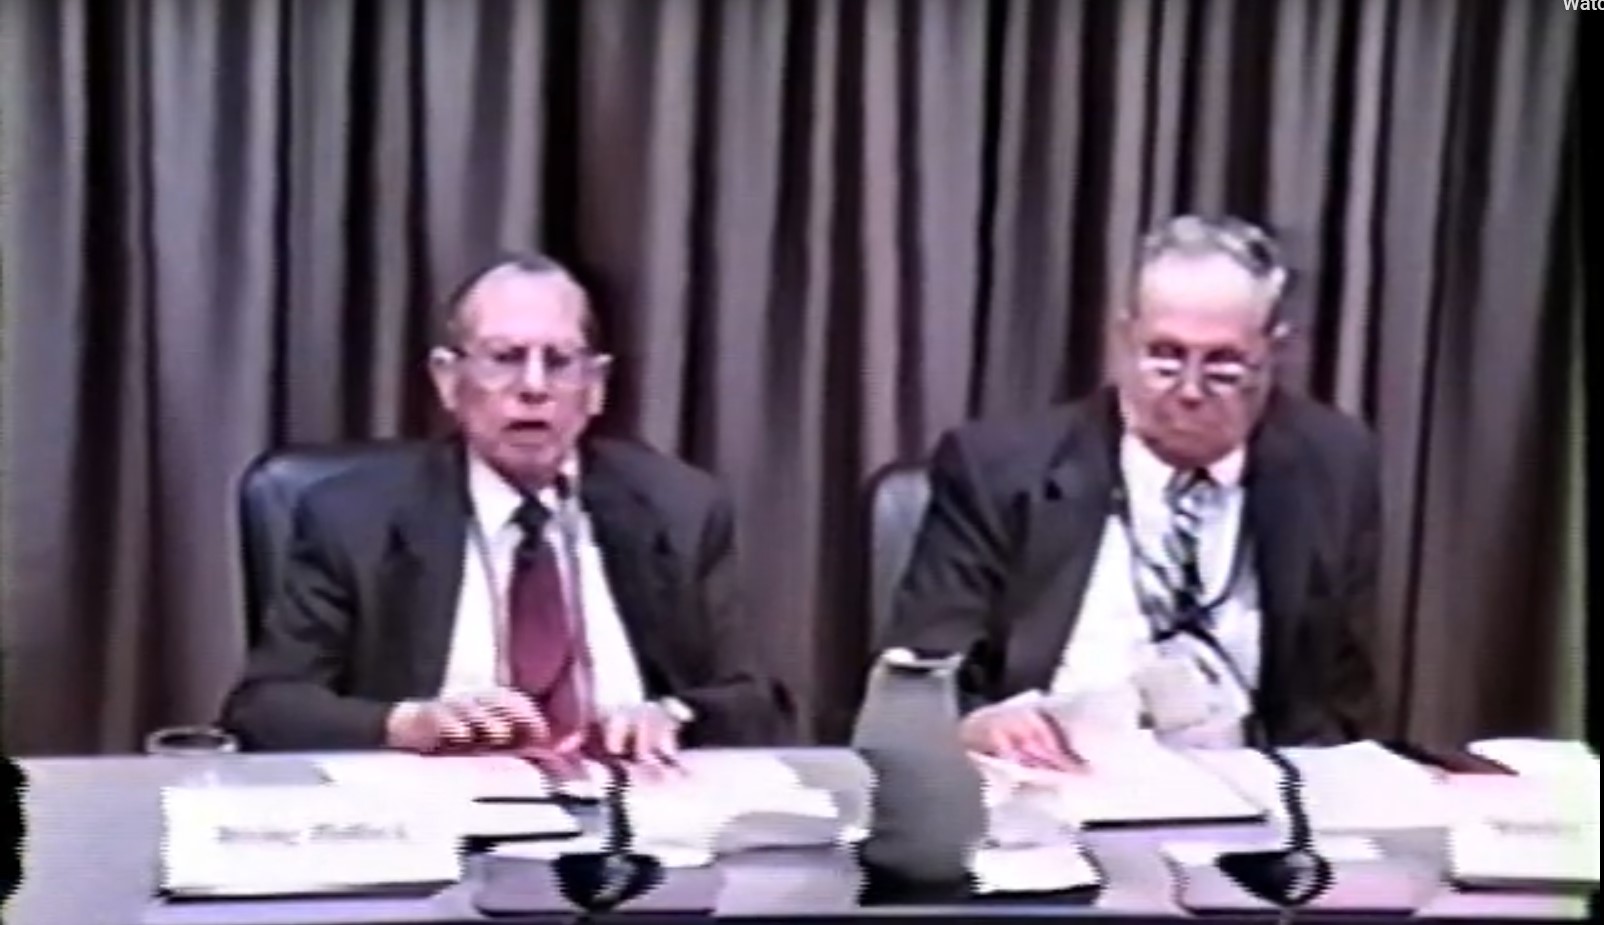 Irving M. Pollack and Stanley Sporkin